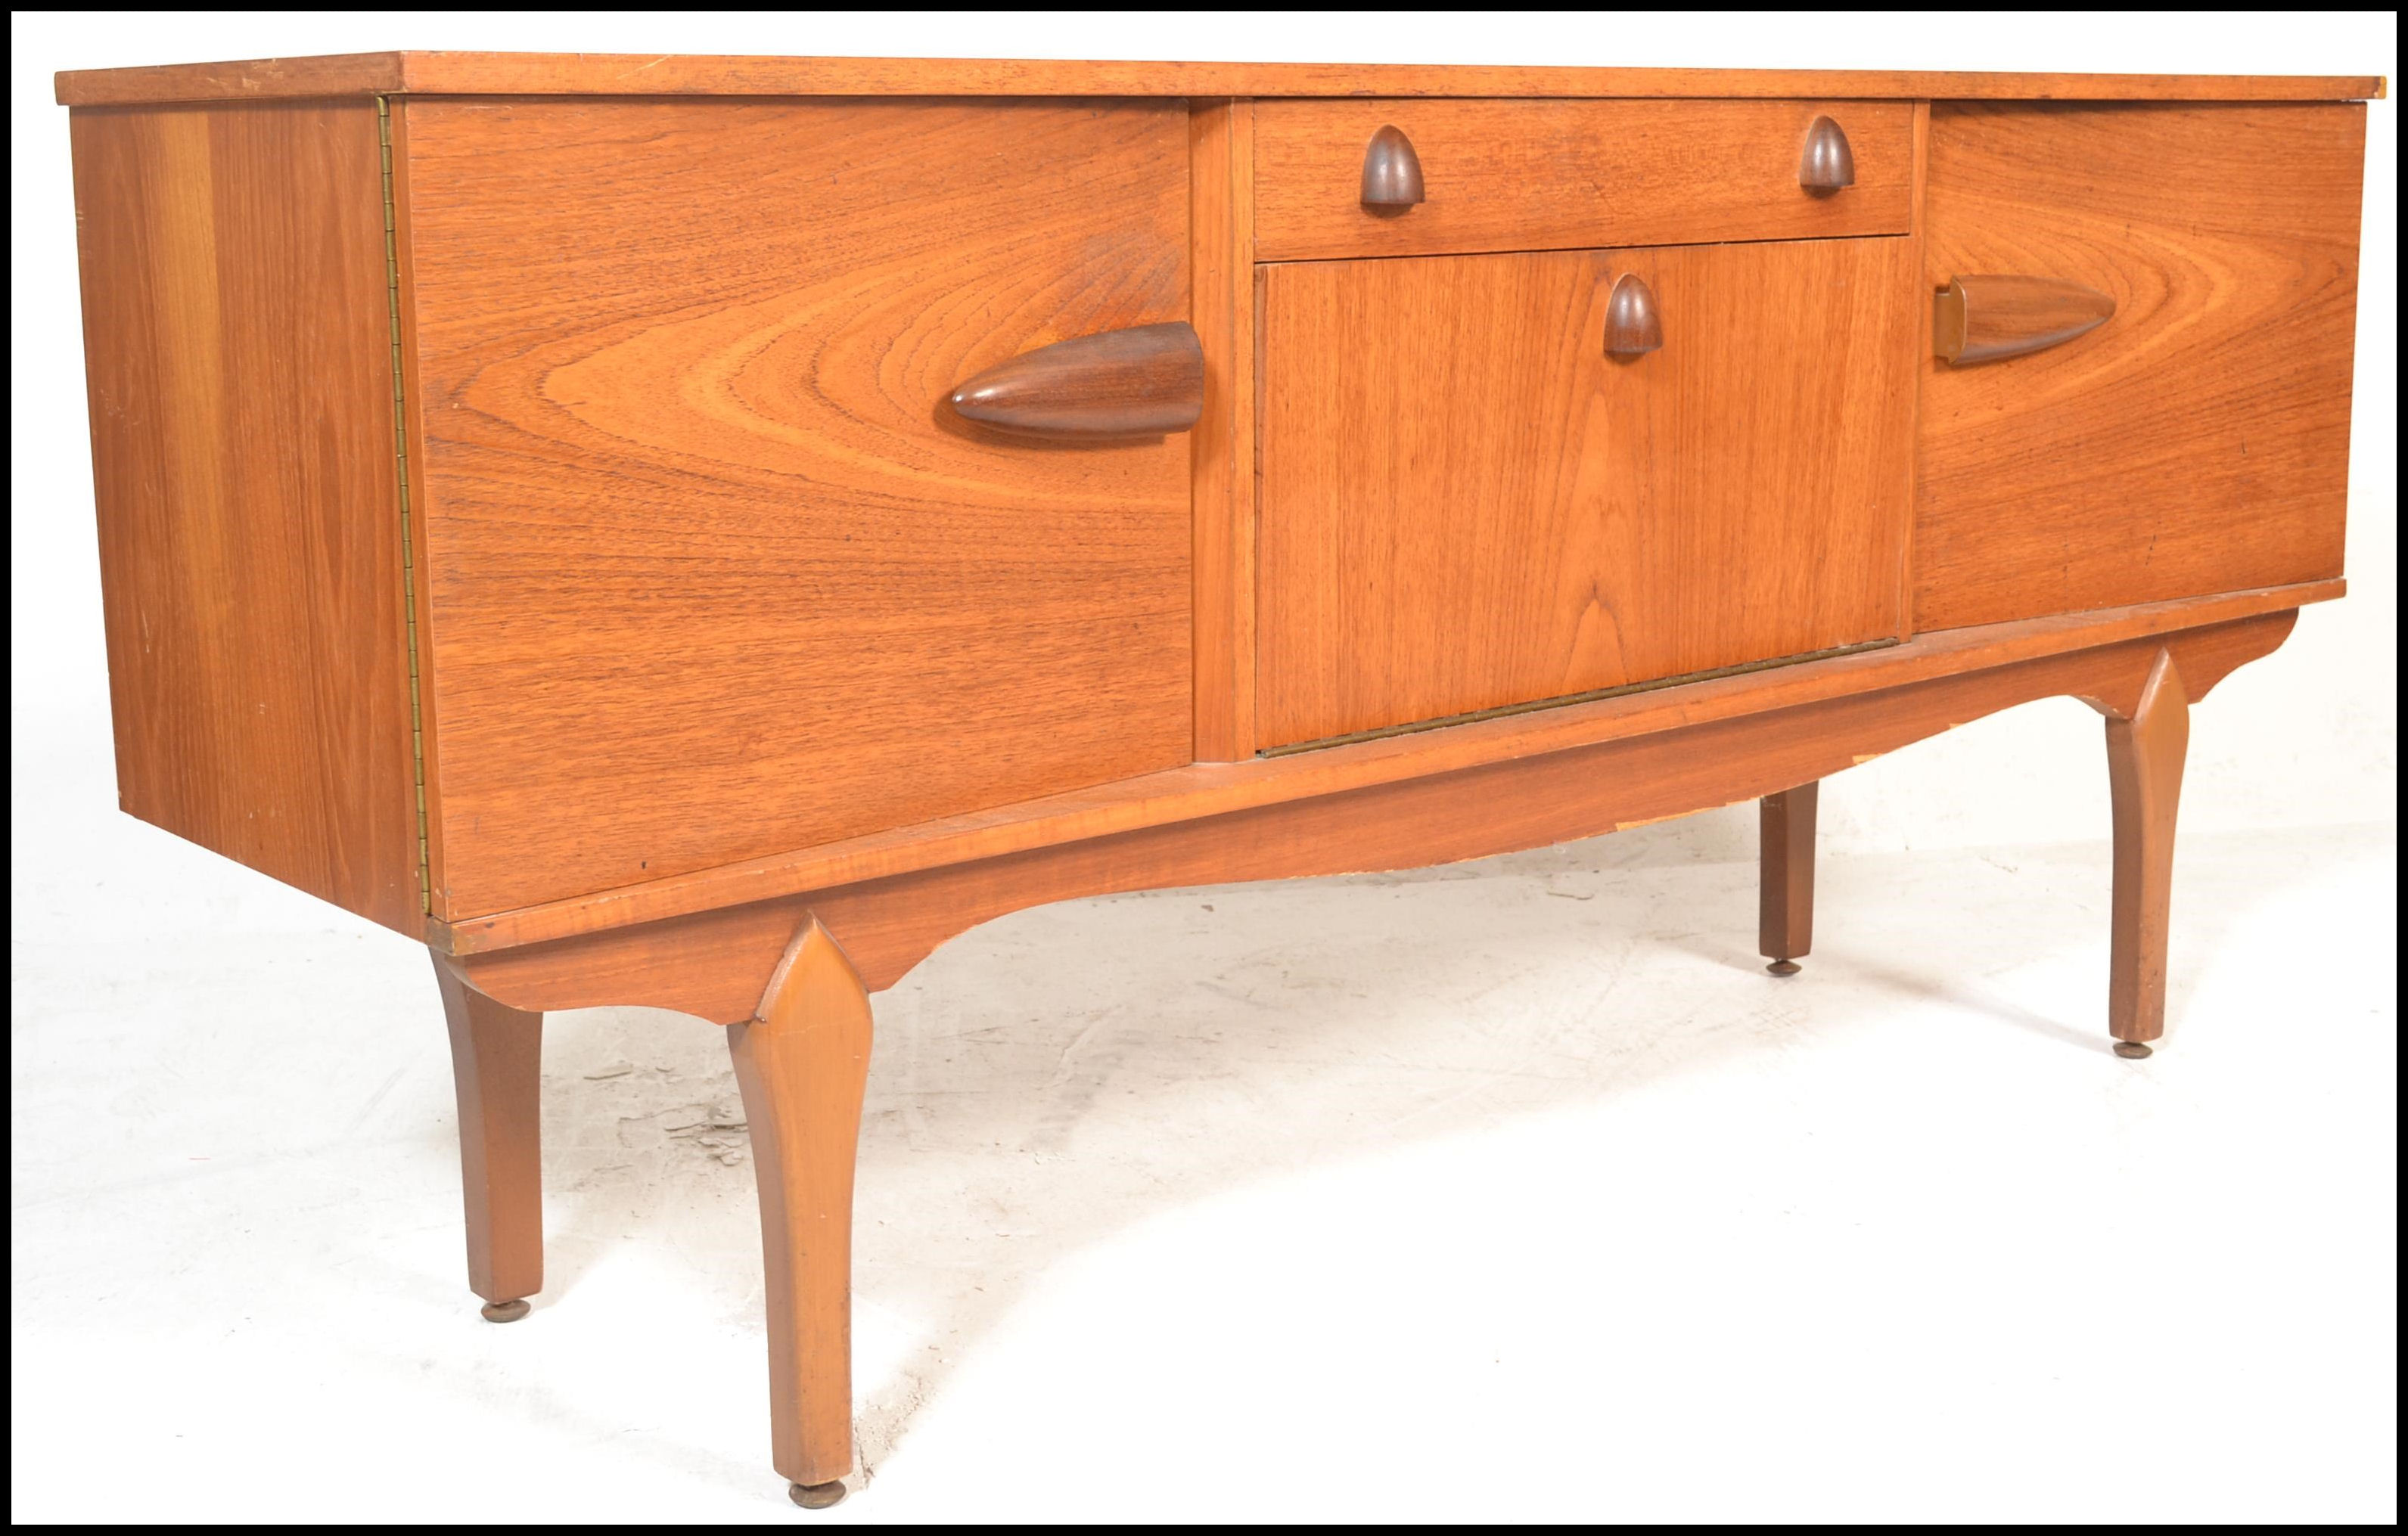 A vintage mid 20th century teak wood sideboard having a central drop down bar compartment with